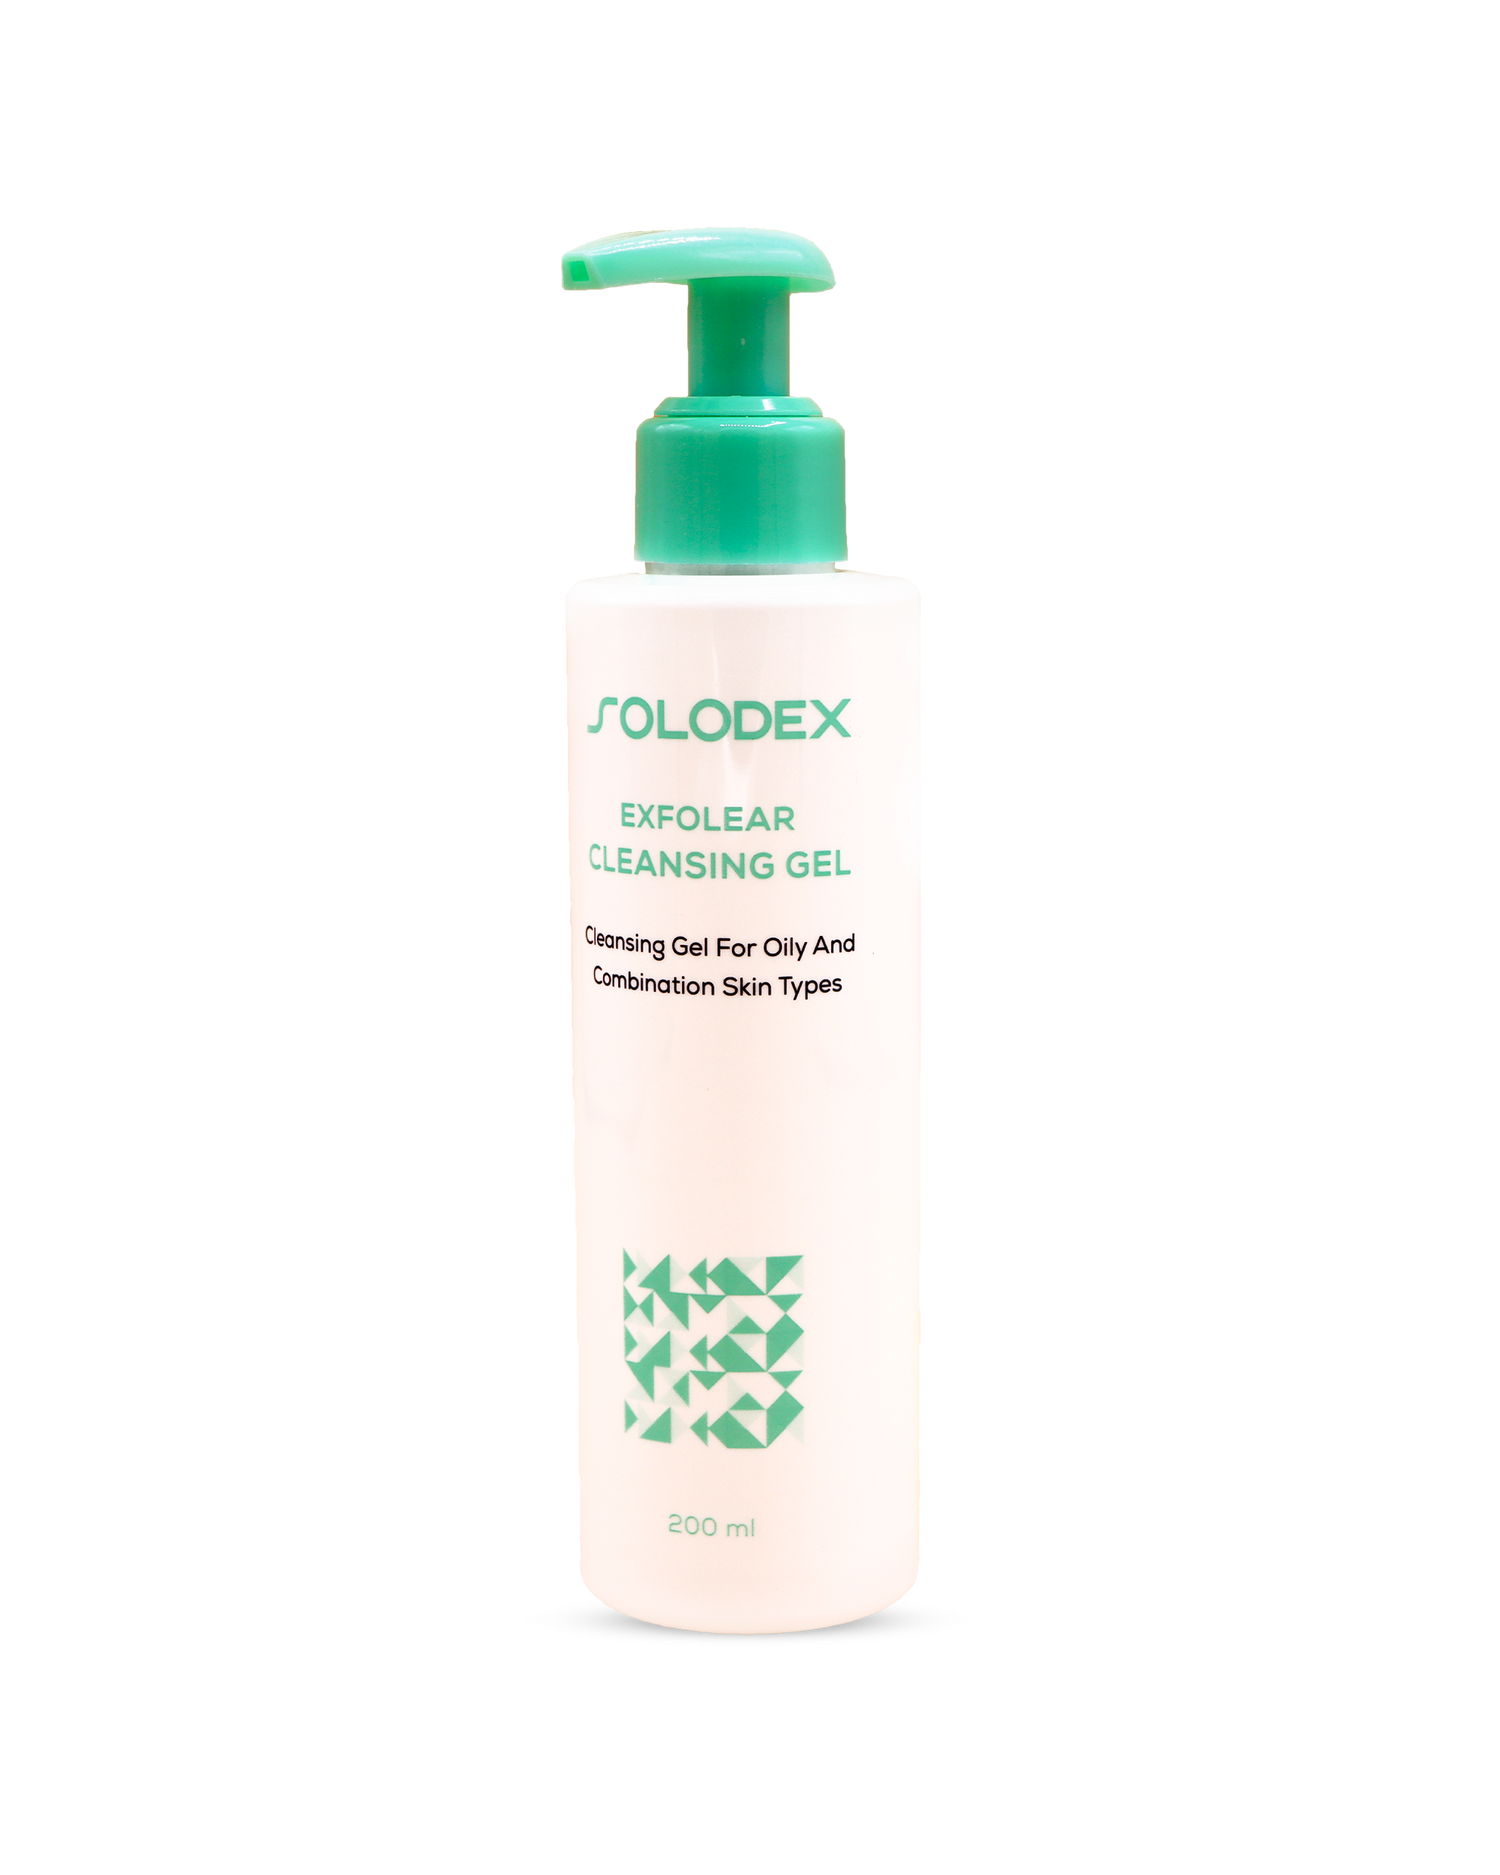 Solodex Exfolear Cleansing Gel